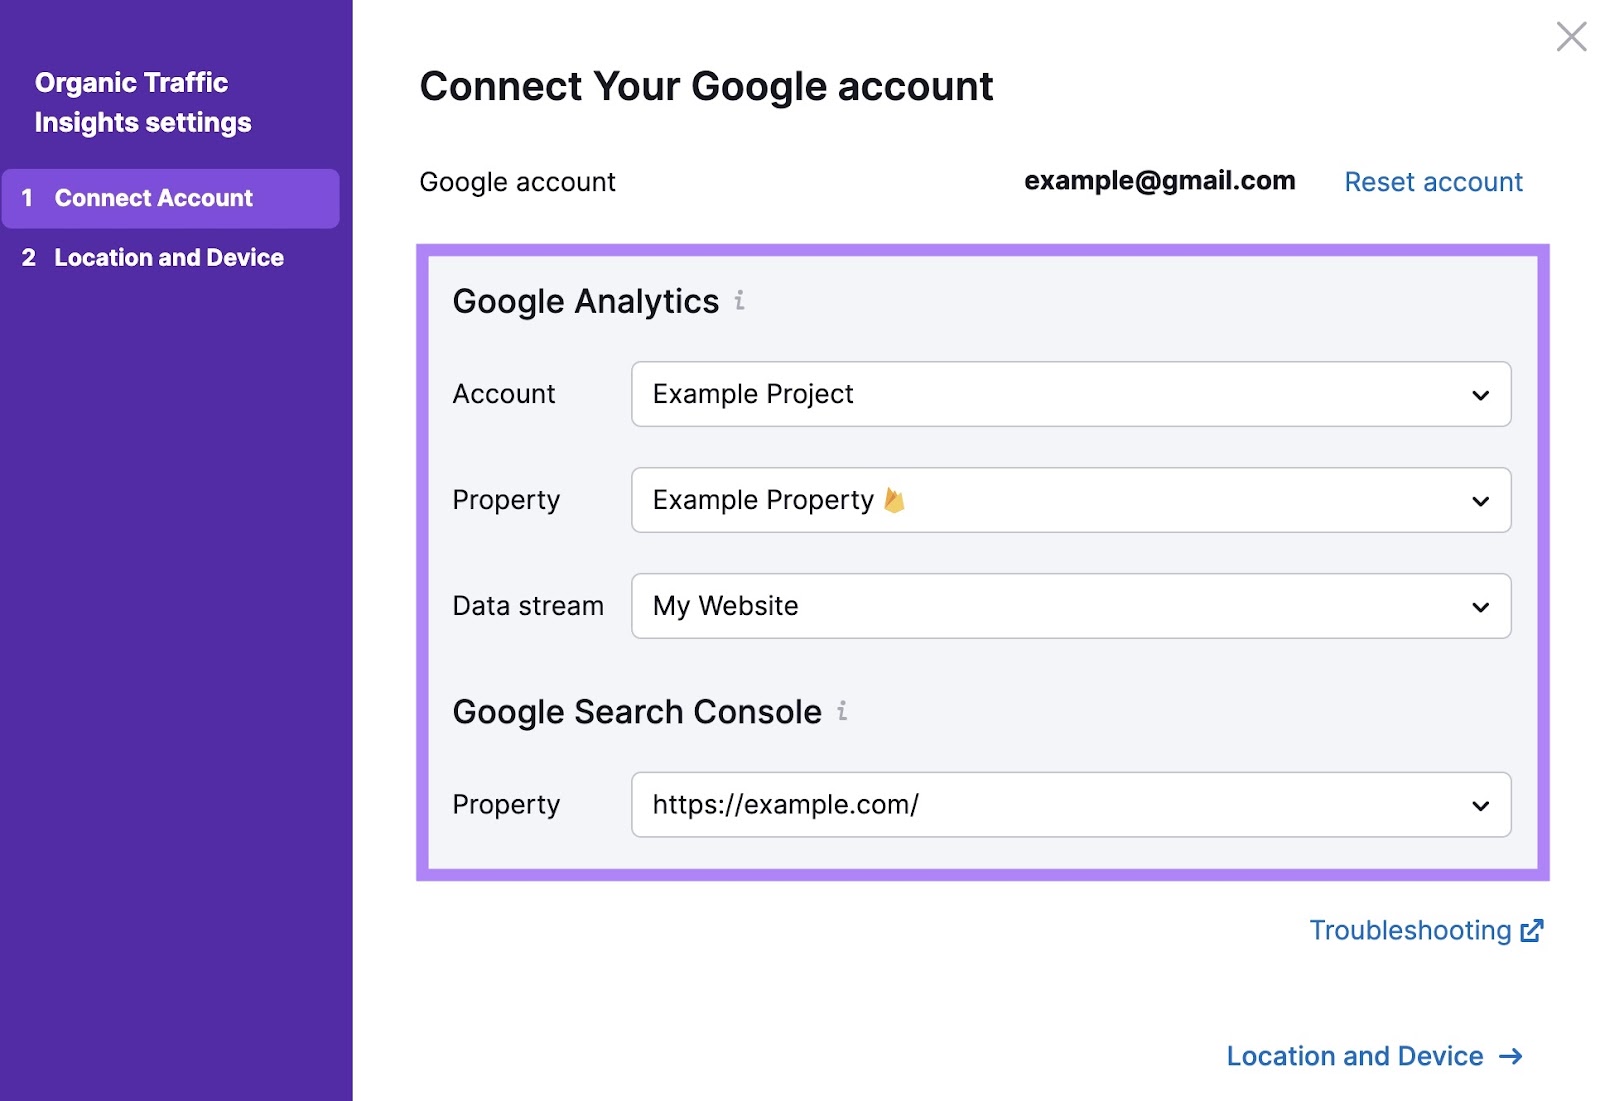 Settings page to choose Google Analytics and Google Search Console properties to connect with Organic traffic insights.